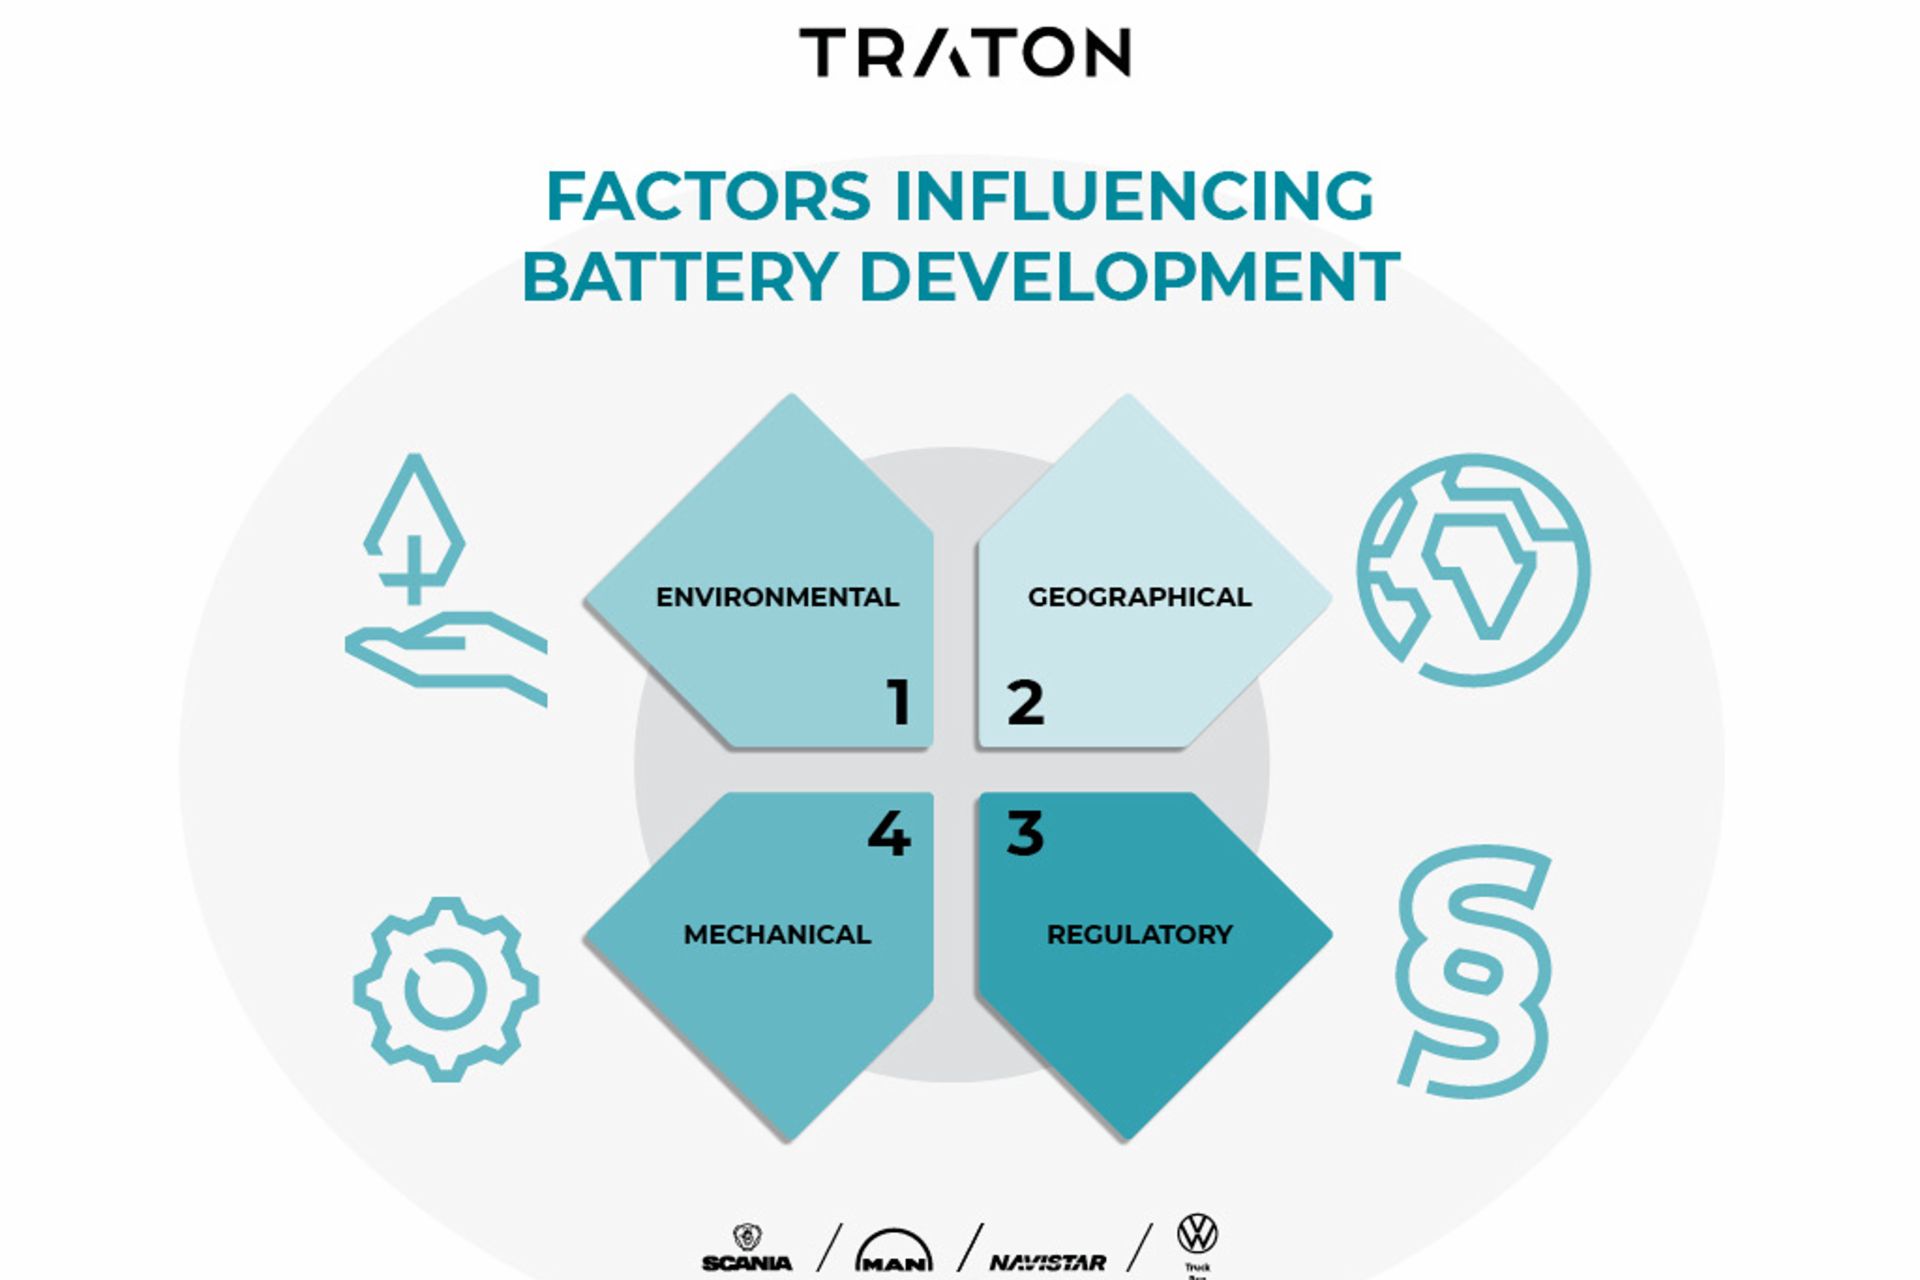 Factors to consider when developing batteries